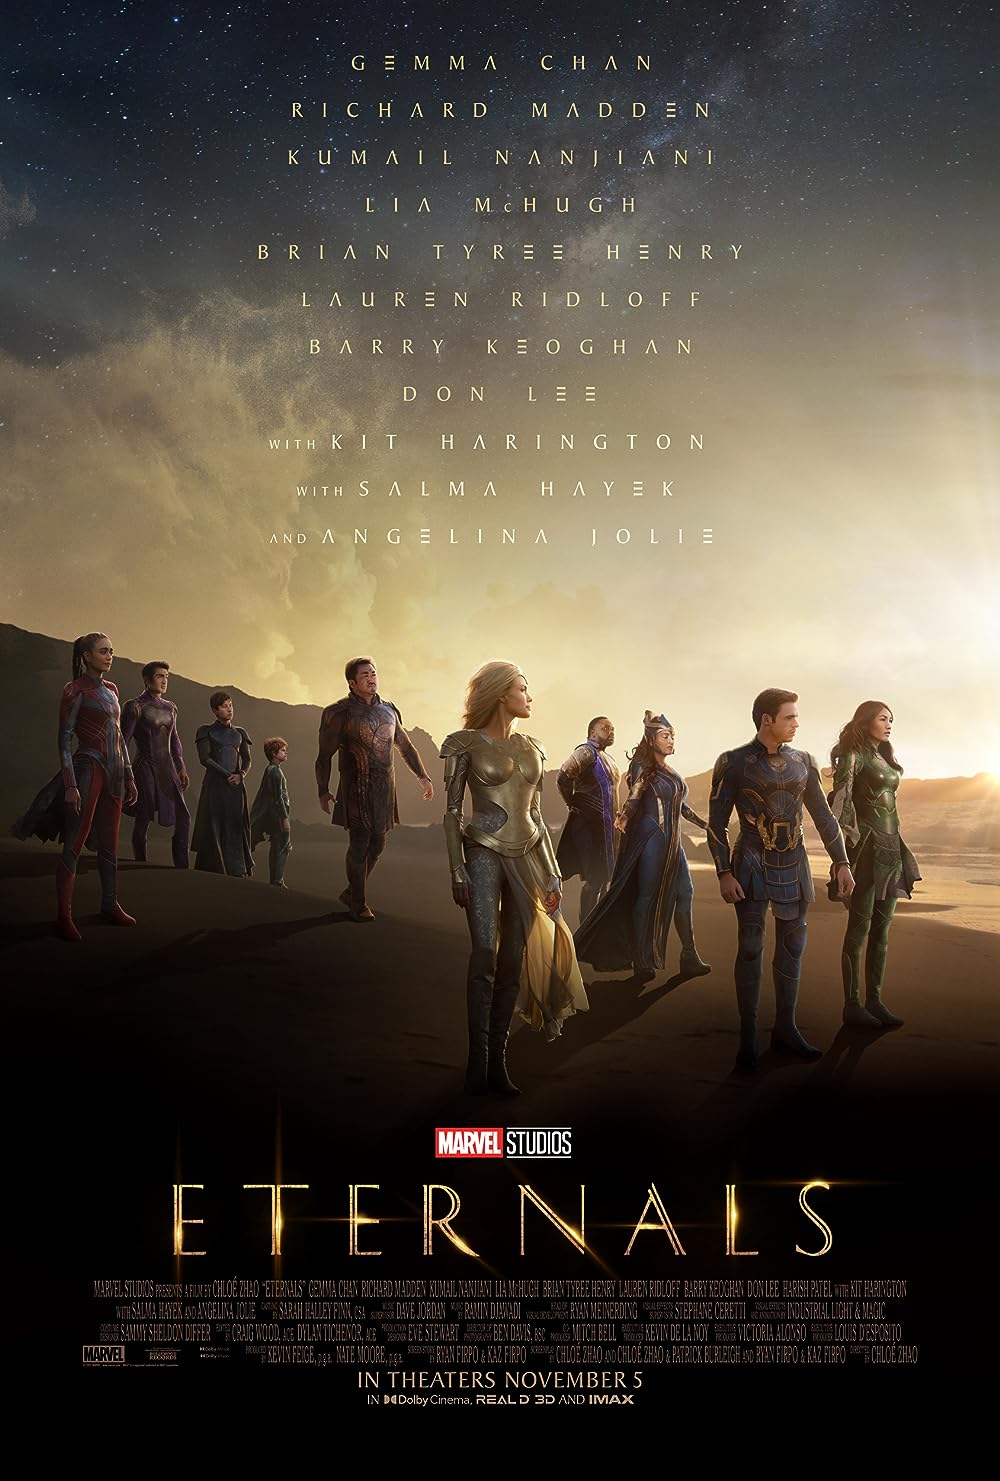 Eternals (November 5, 2021): Exploring ancient cosmic beings, the Eternals, the movie uncovers their long-standing mission to protect humanity from the Deviants.